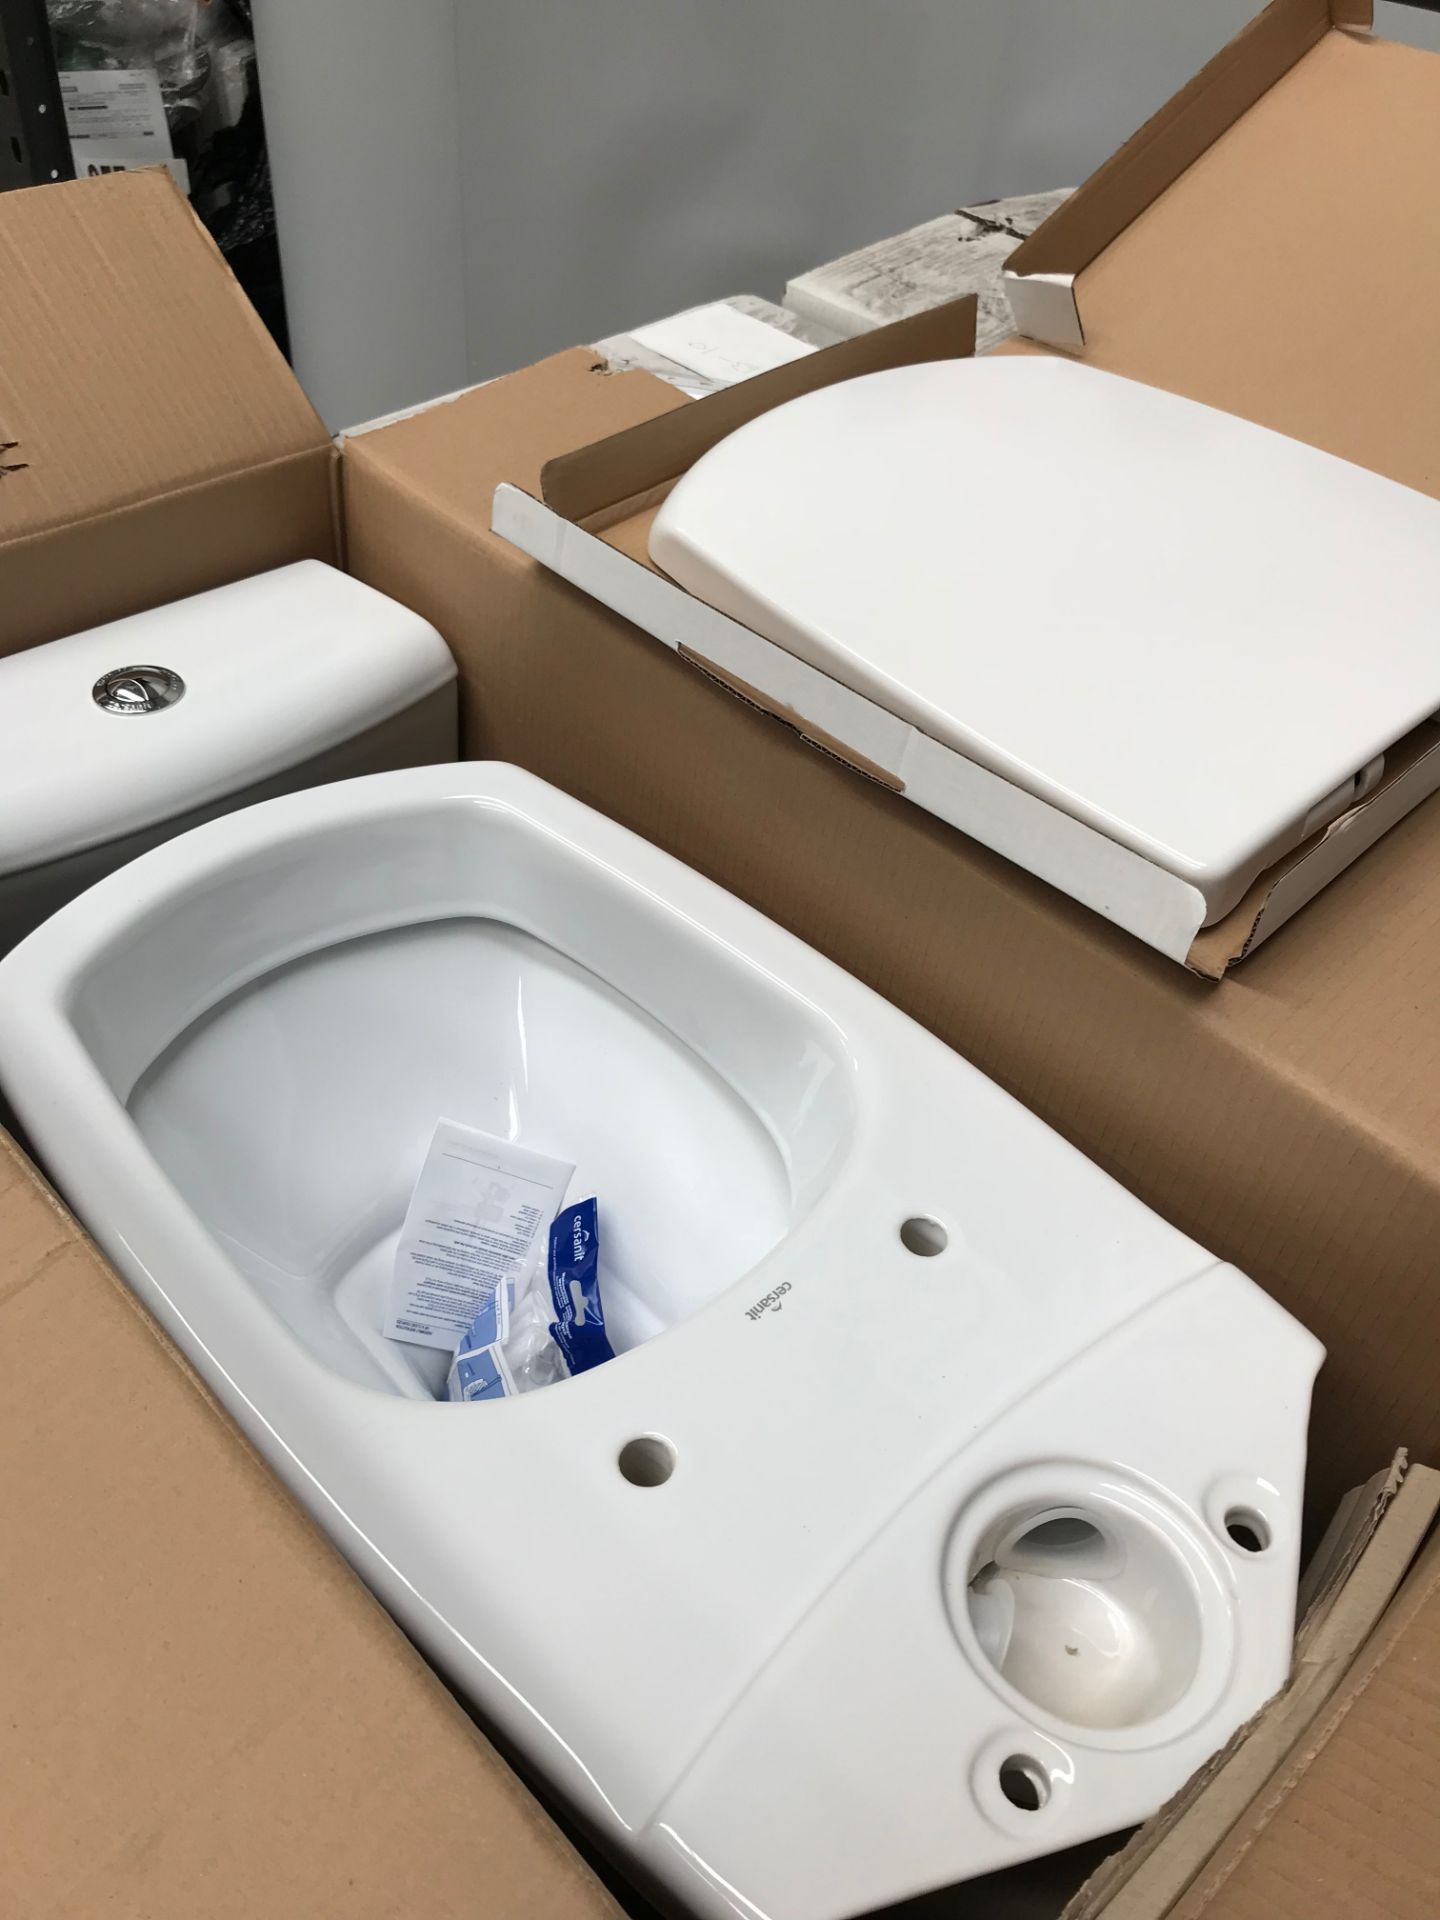 1 x Navassa Close Coupled Toilet with Soft Closing Seat - Image 7 of 7